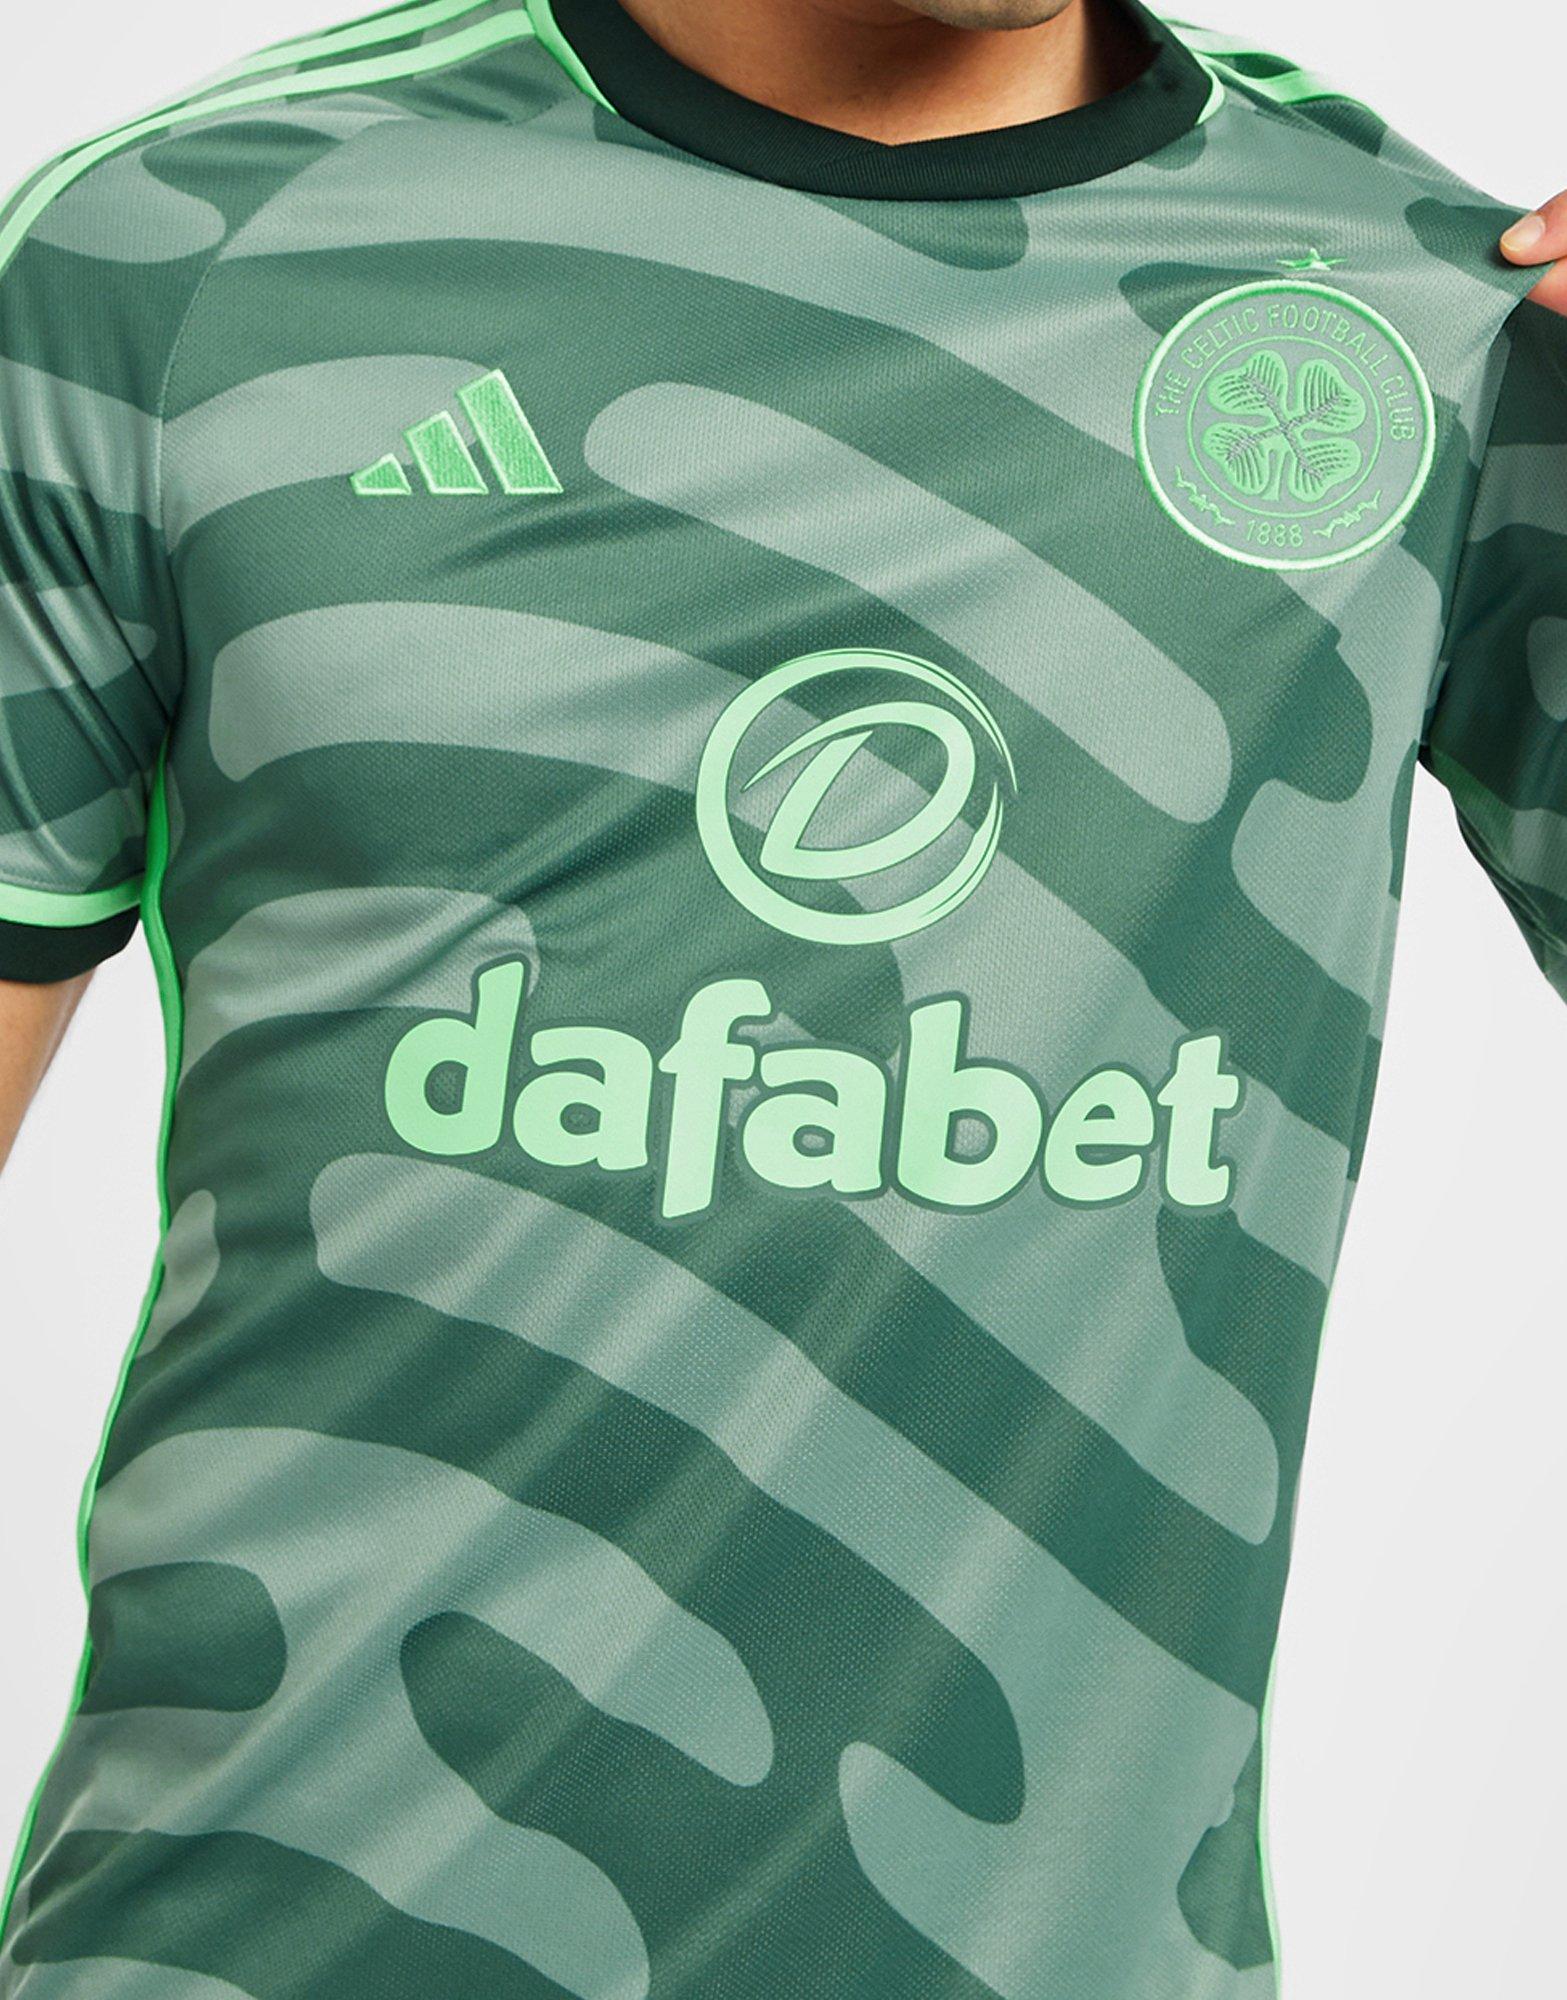 Celtic third kit 2021/22 'leaked' online as fans react to pink